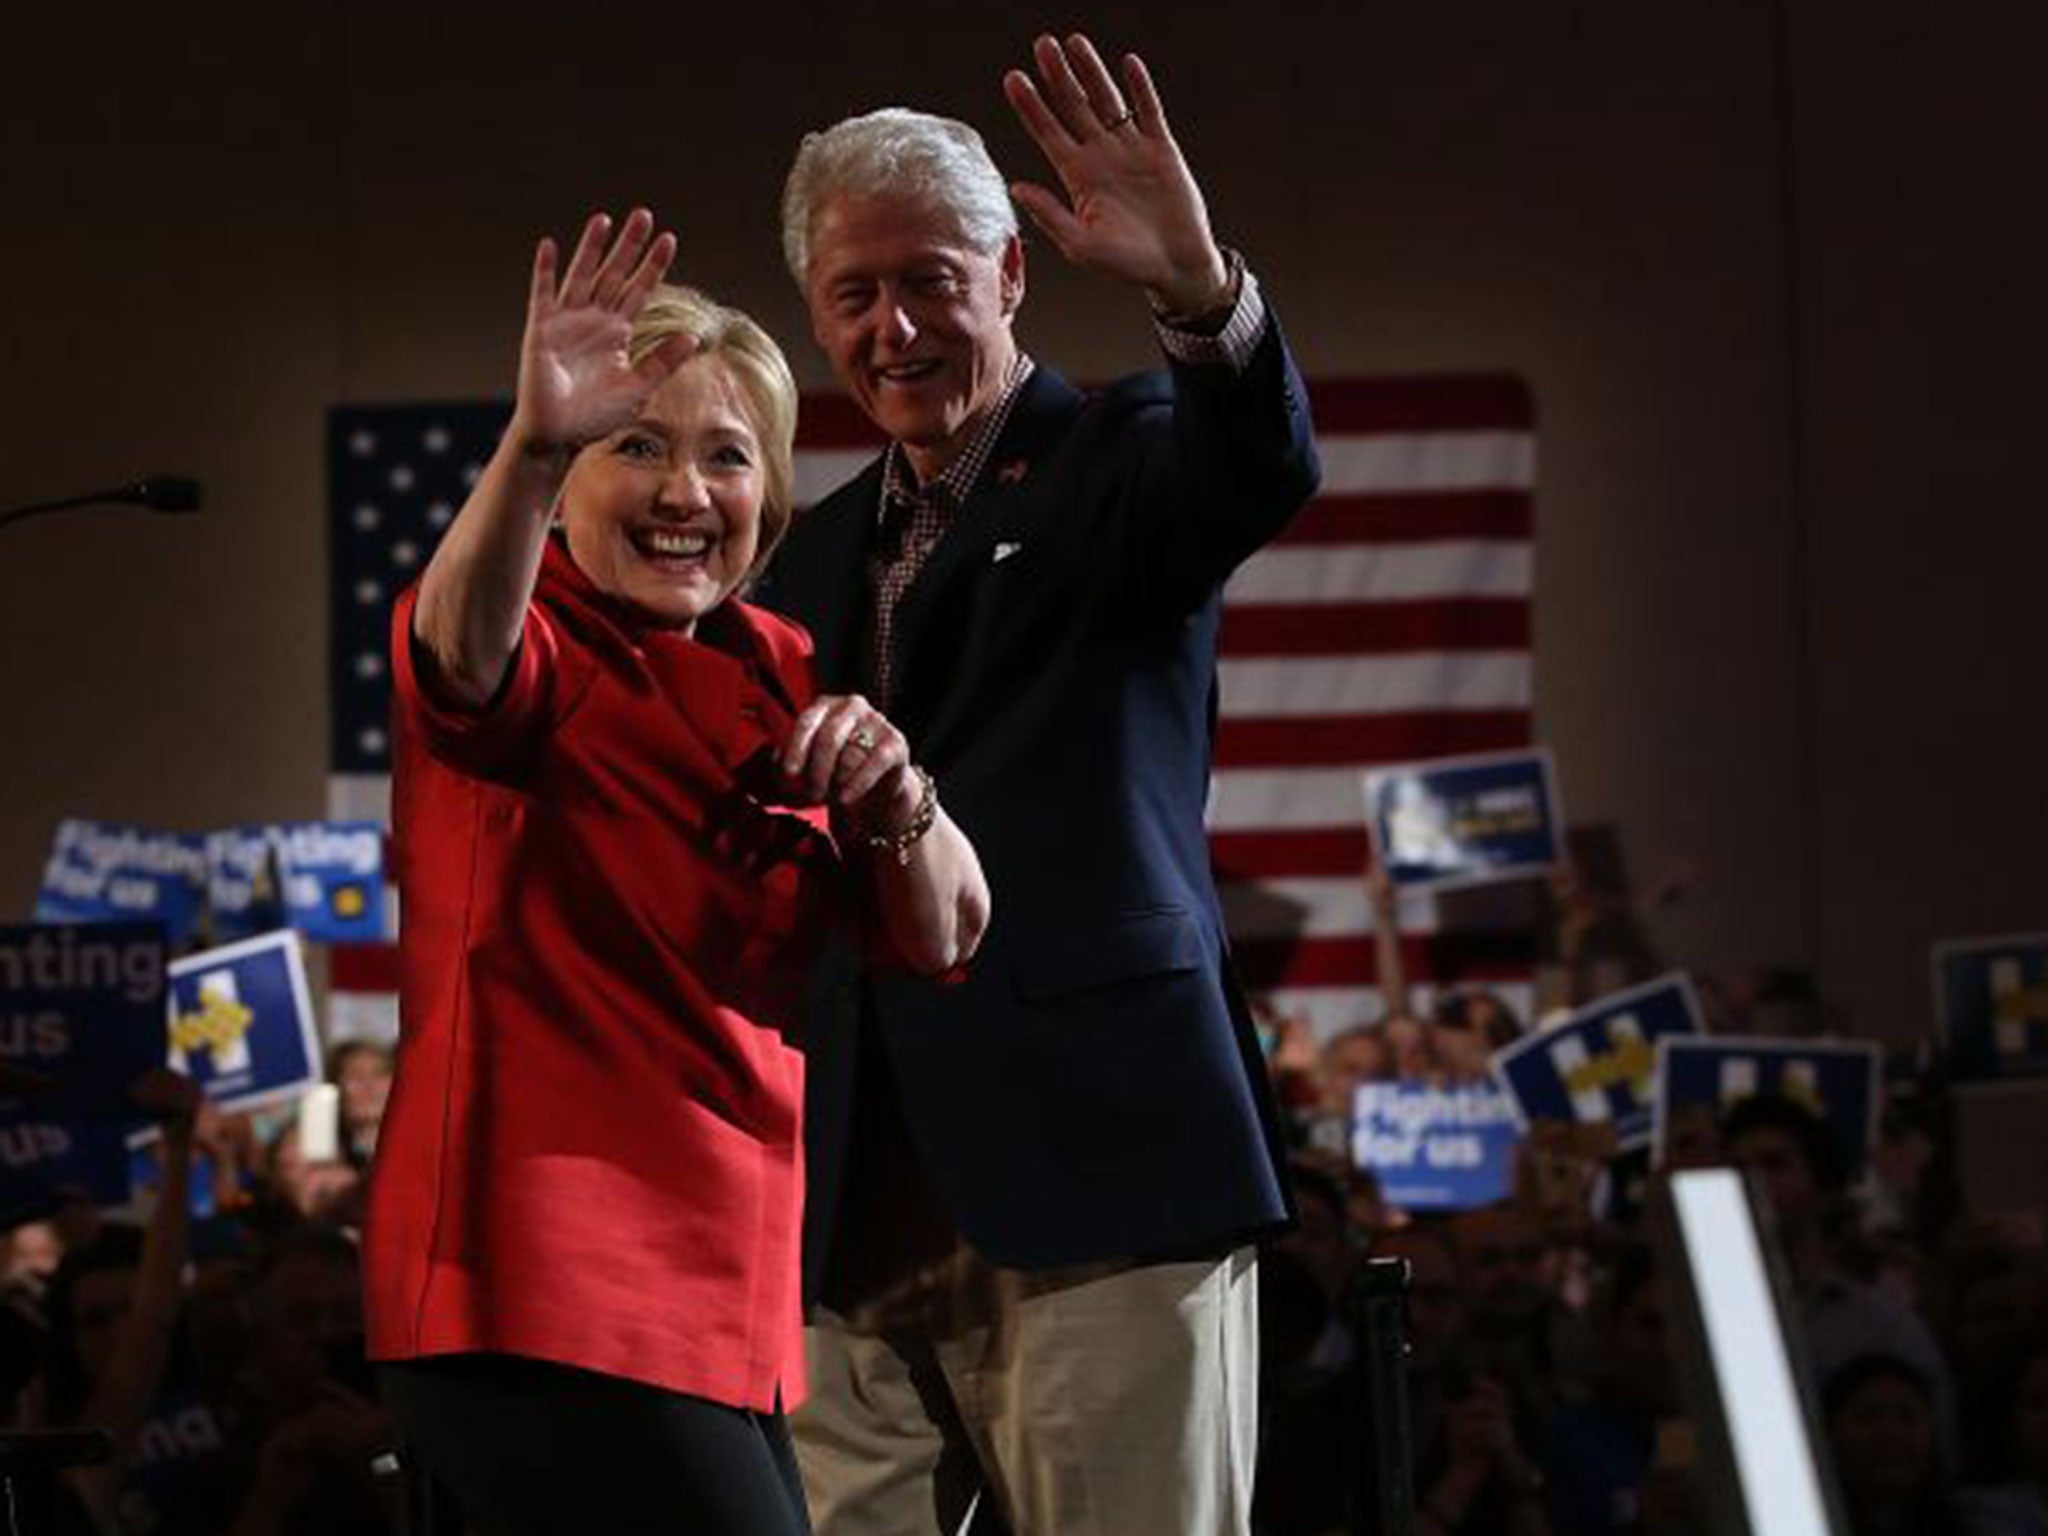 Bill and Hillary Clinton greet supporters during a caucus day event at in Las Vegas